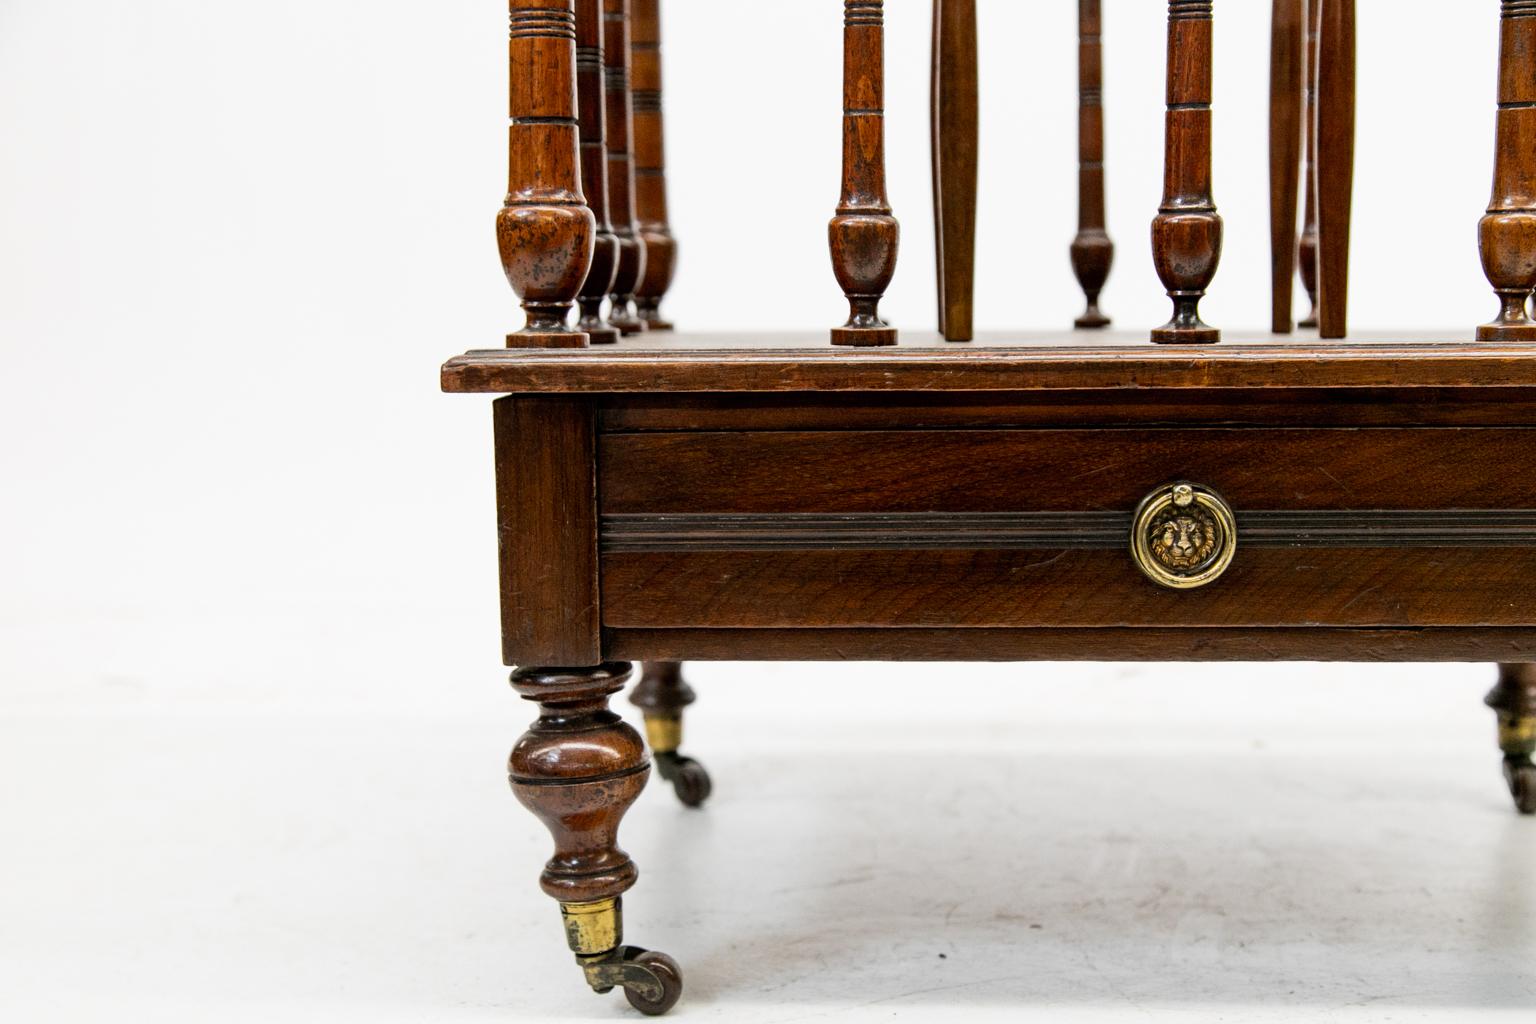 19th century English mahogany Canterbury, with three sections, turned spindle supports with finials on the corners. The legs are turned with original brass castors. It has one drawer.